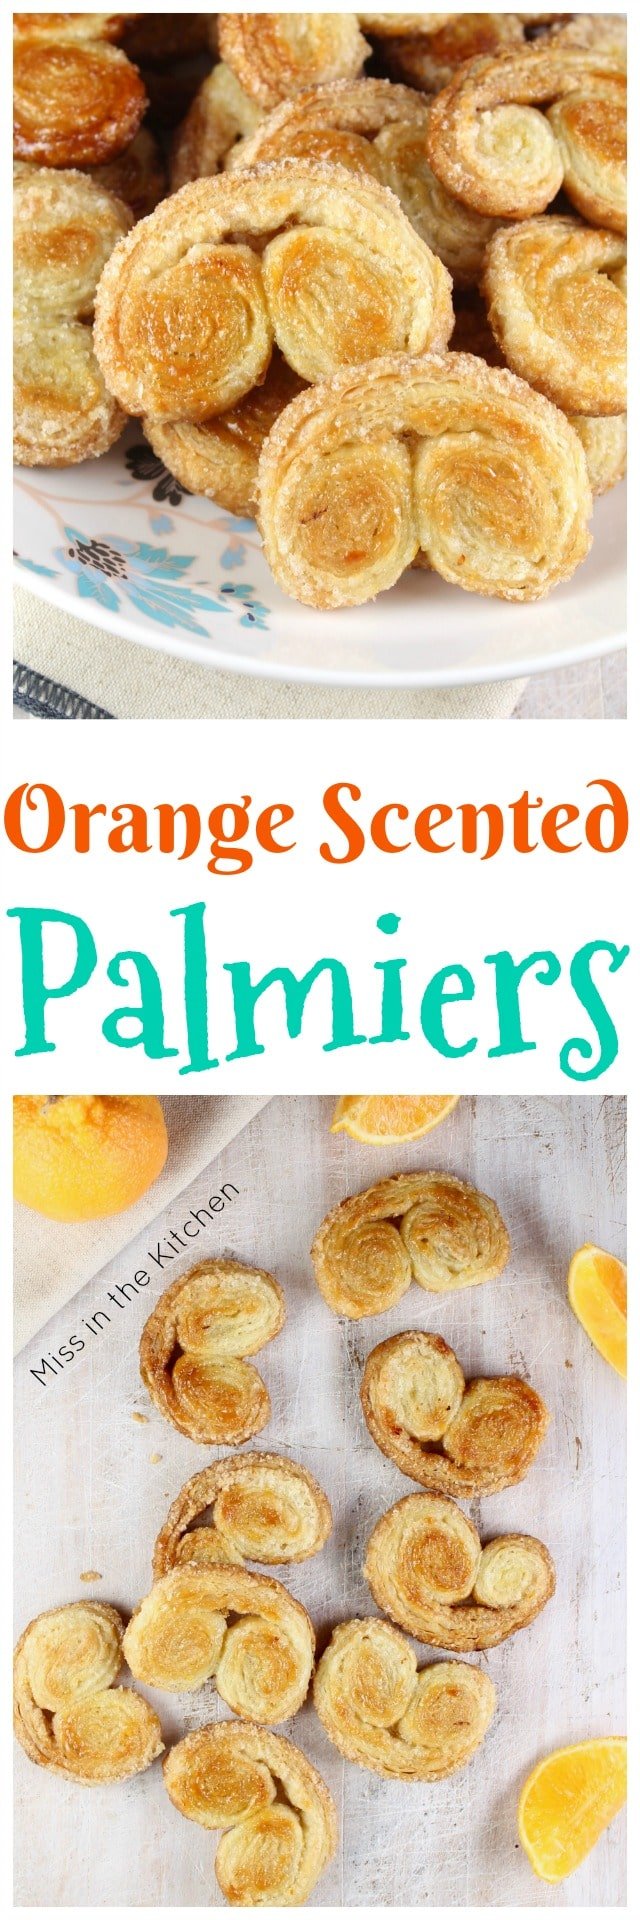 Orange Scented Palmiers Recipe from Effortless Entertaining by Meredith Steele of Steel House Kitchen ~ A delicious holiday cookie to bake and share! MissintheKitchen.com